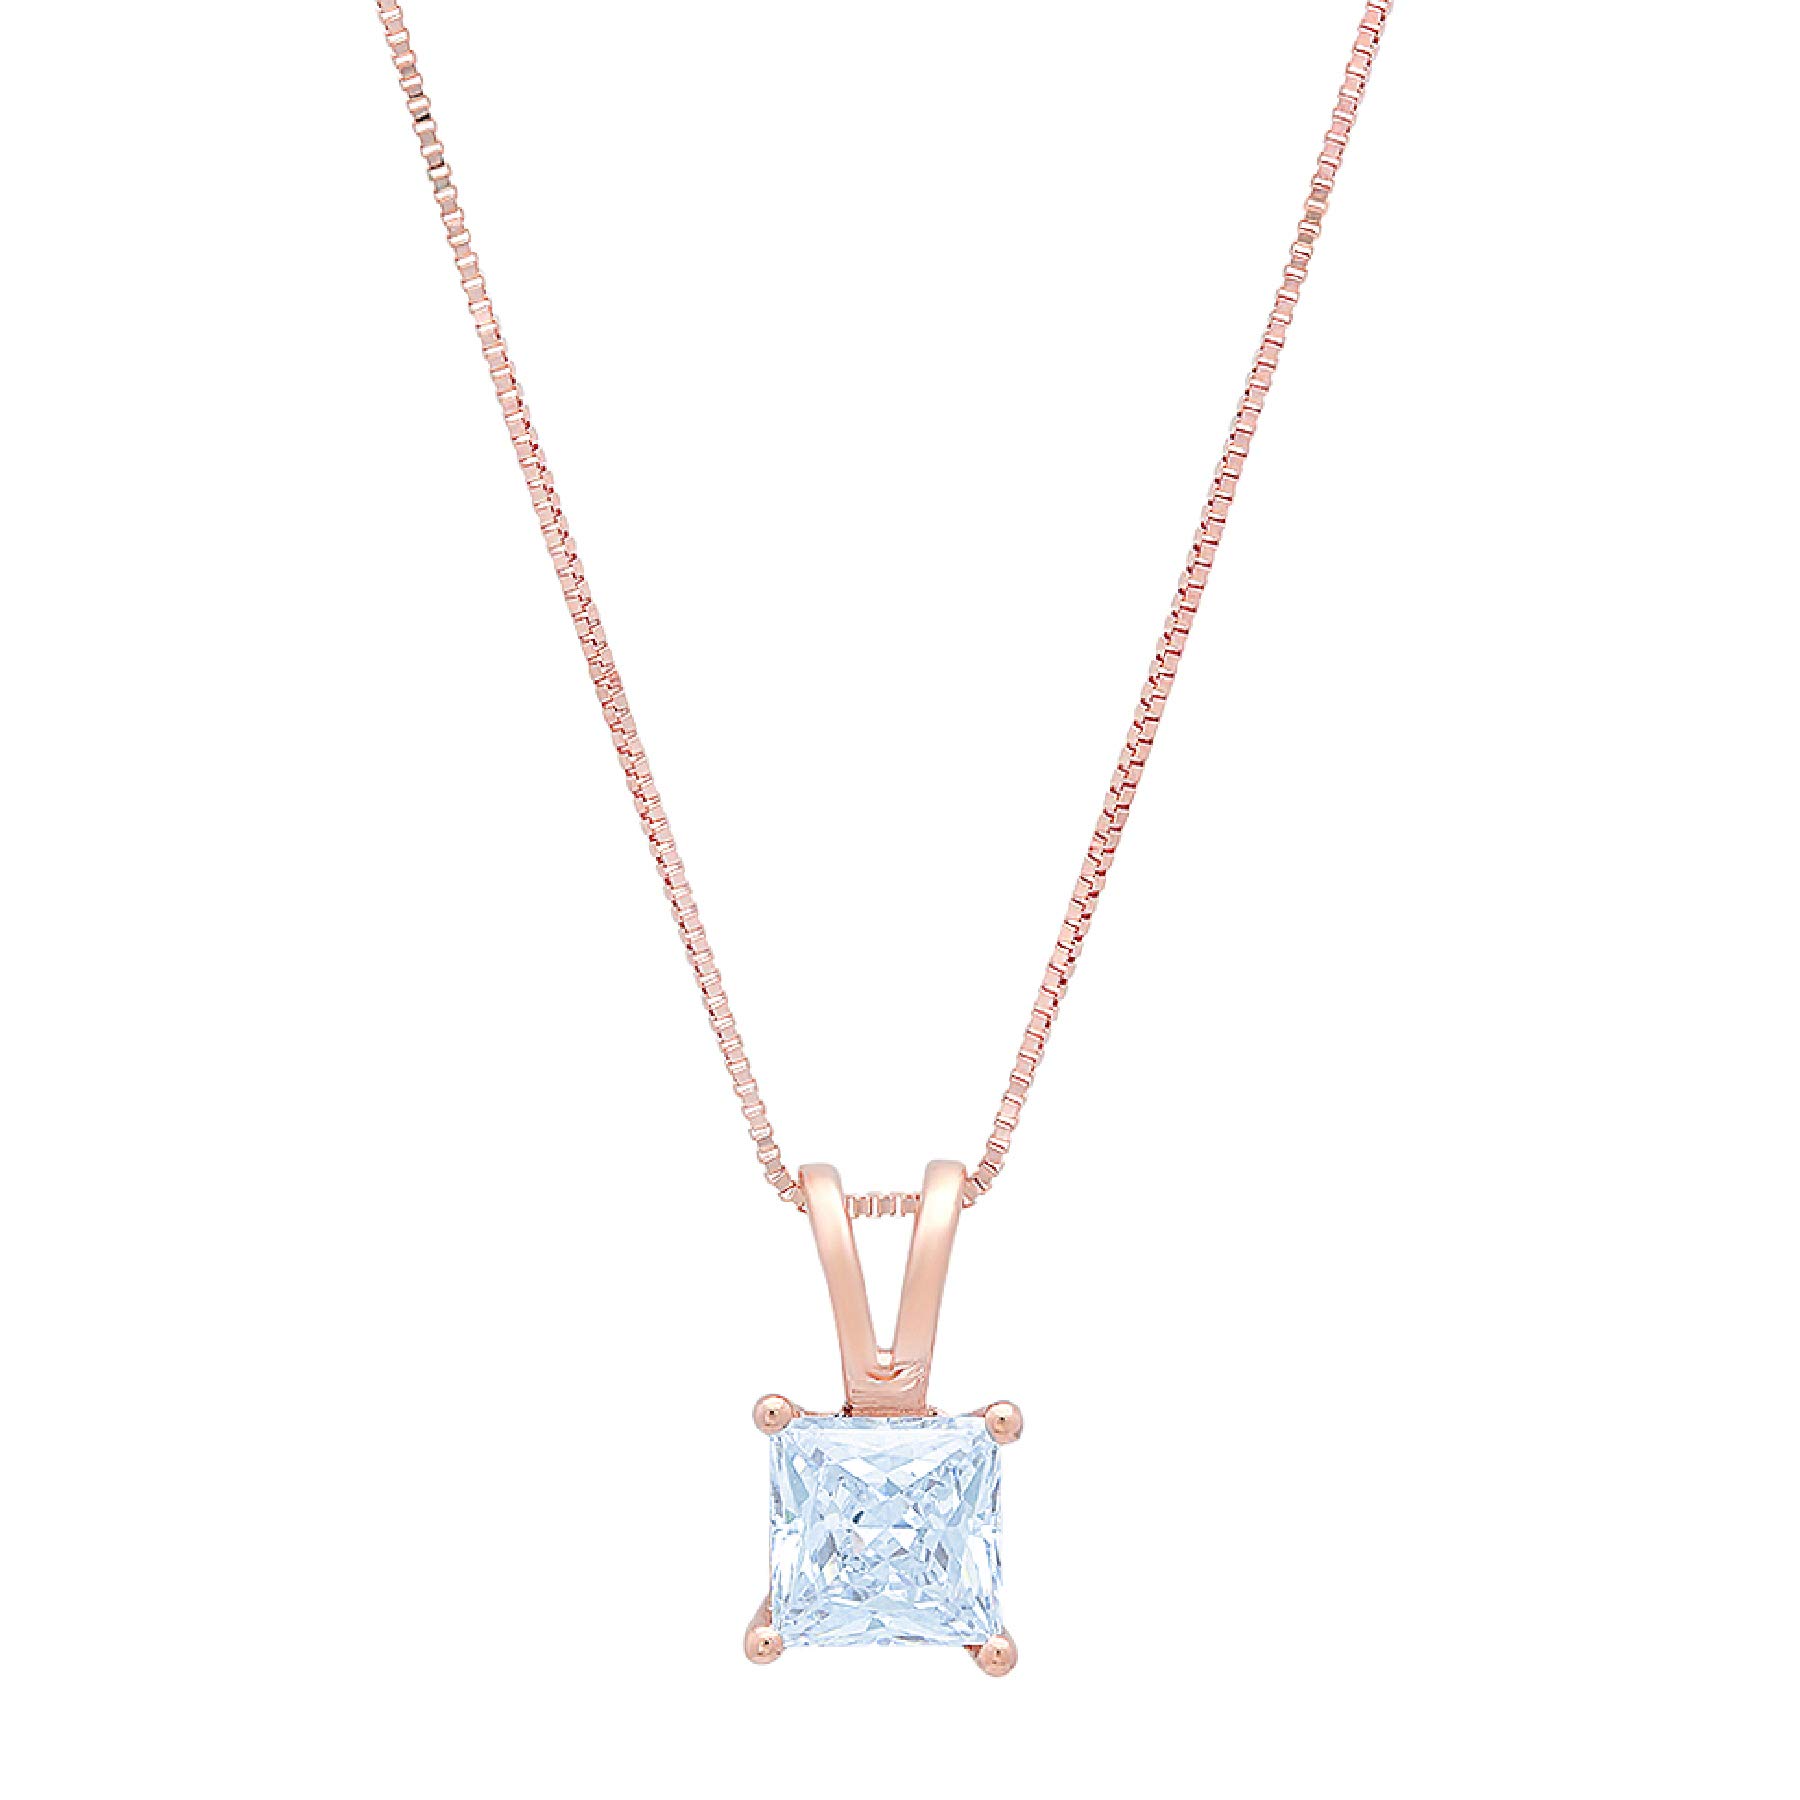 Clara Pucci 2.0 ct Brilliant Princess Cut Stunning Genuine Flawless Blue Simulated Diamond Gemstone Solitaire Pendant Necklace With 16